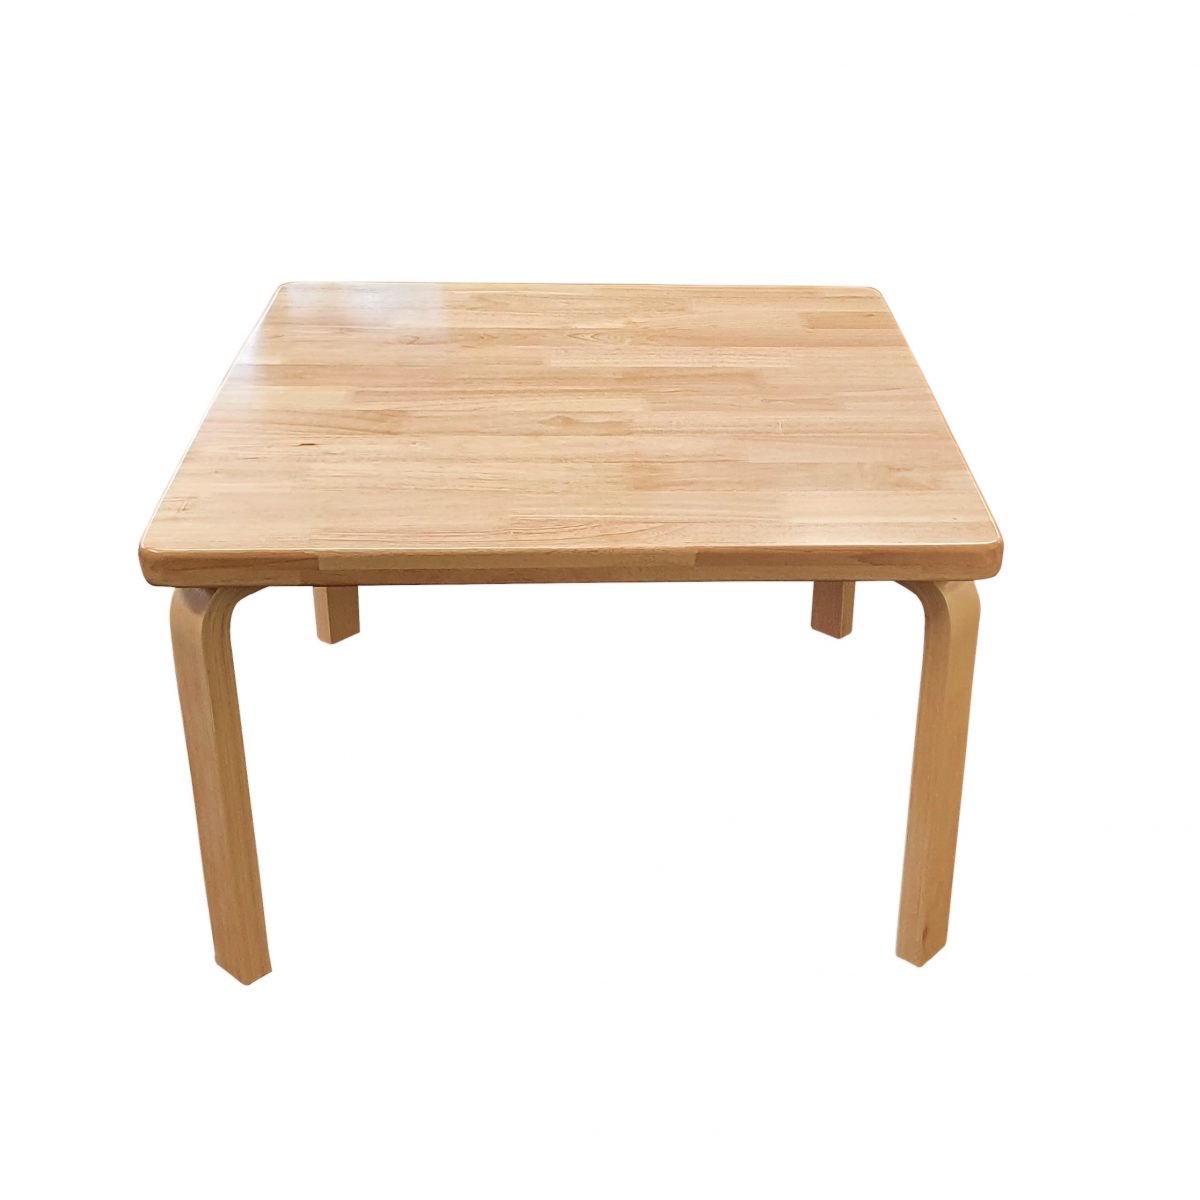 Oakland Table - Square 750x750